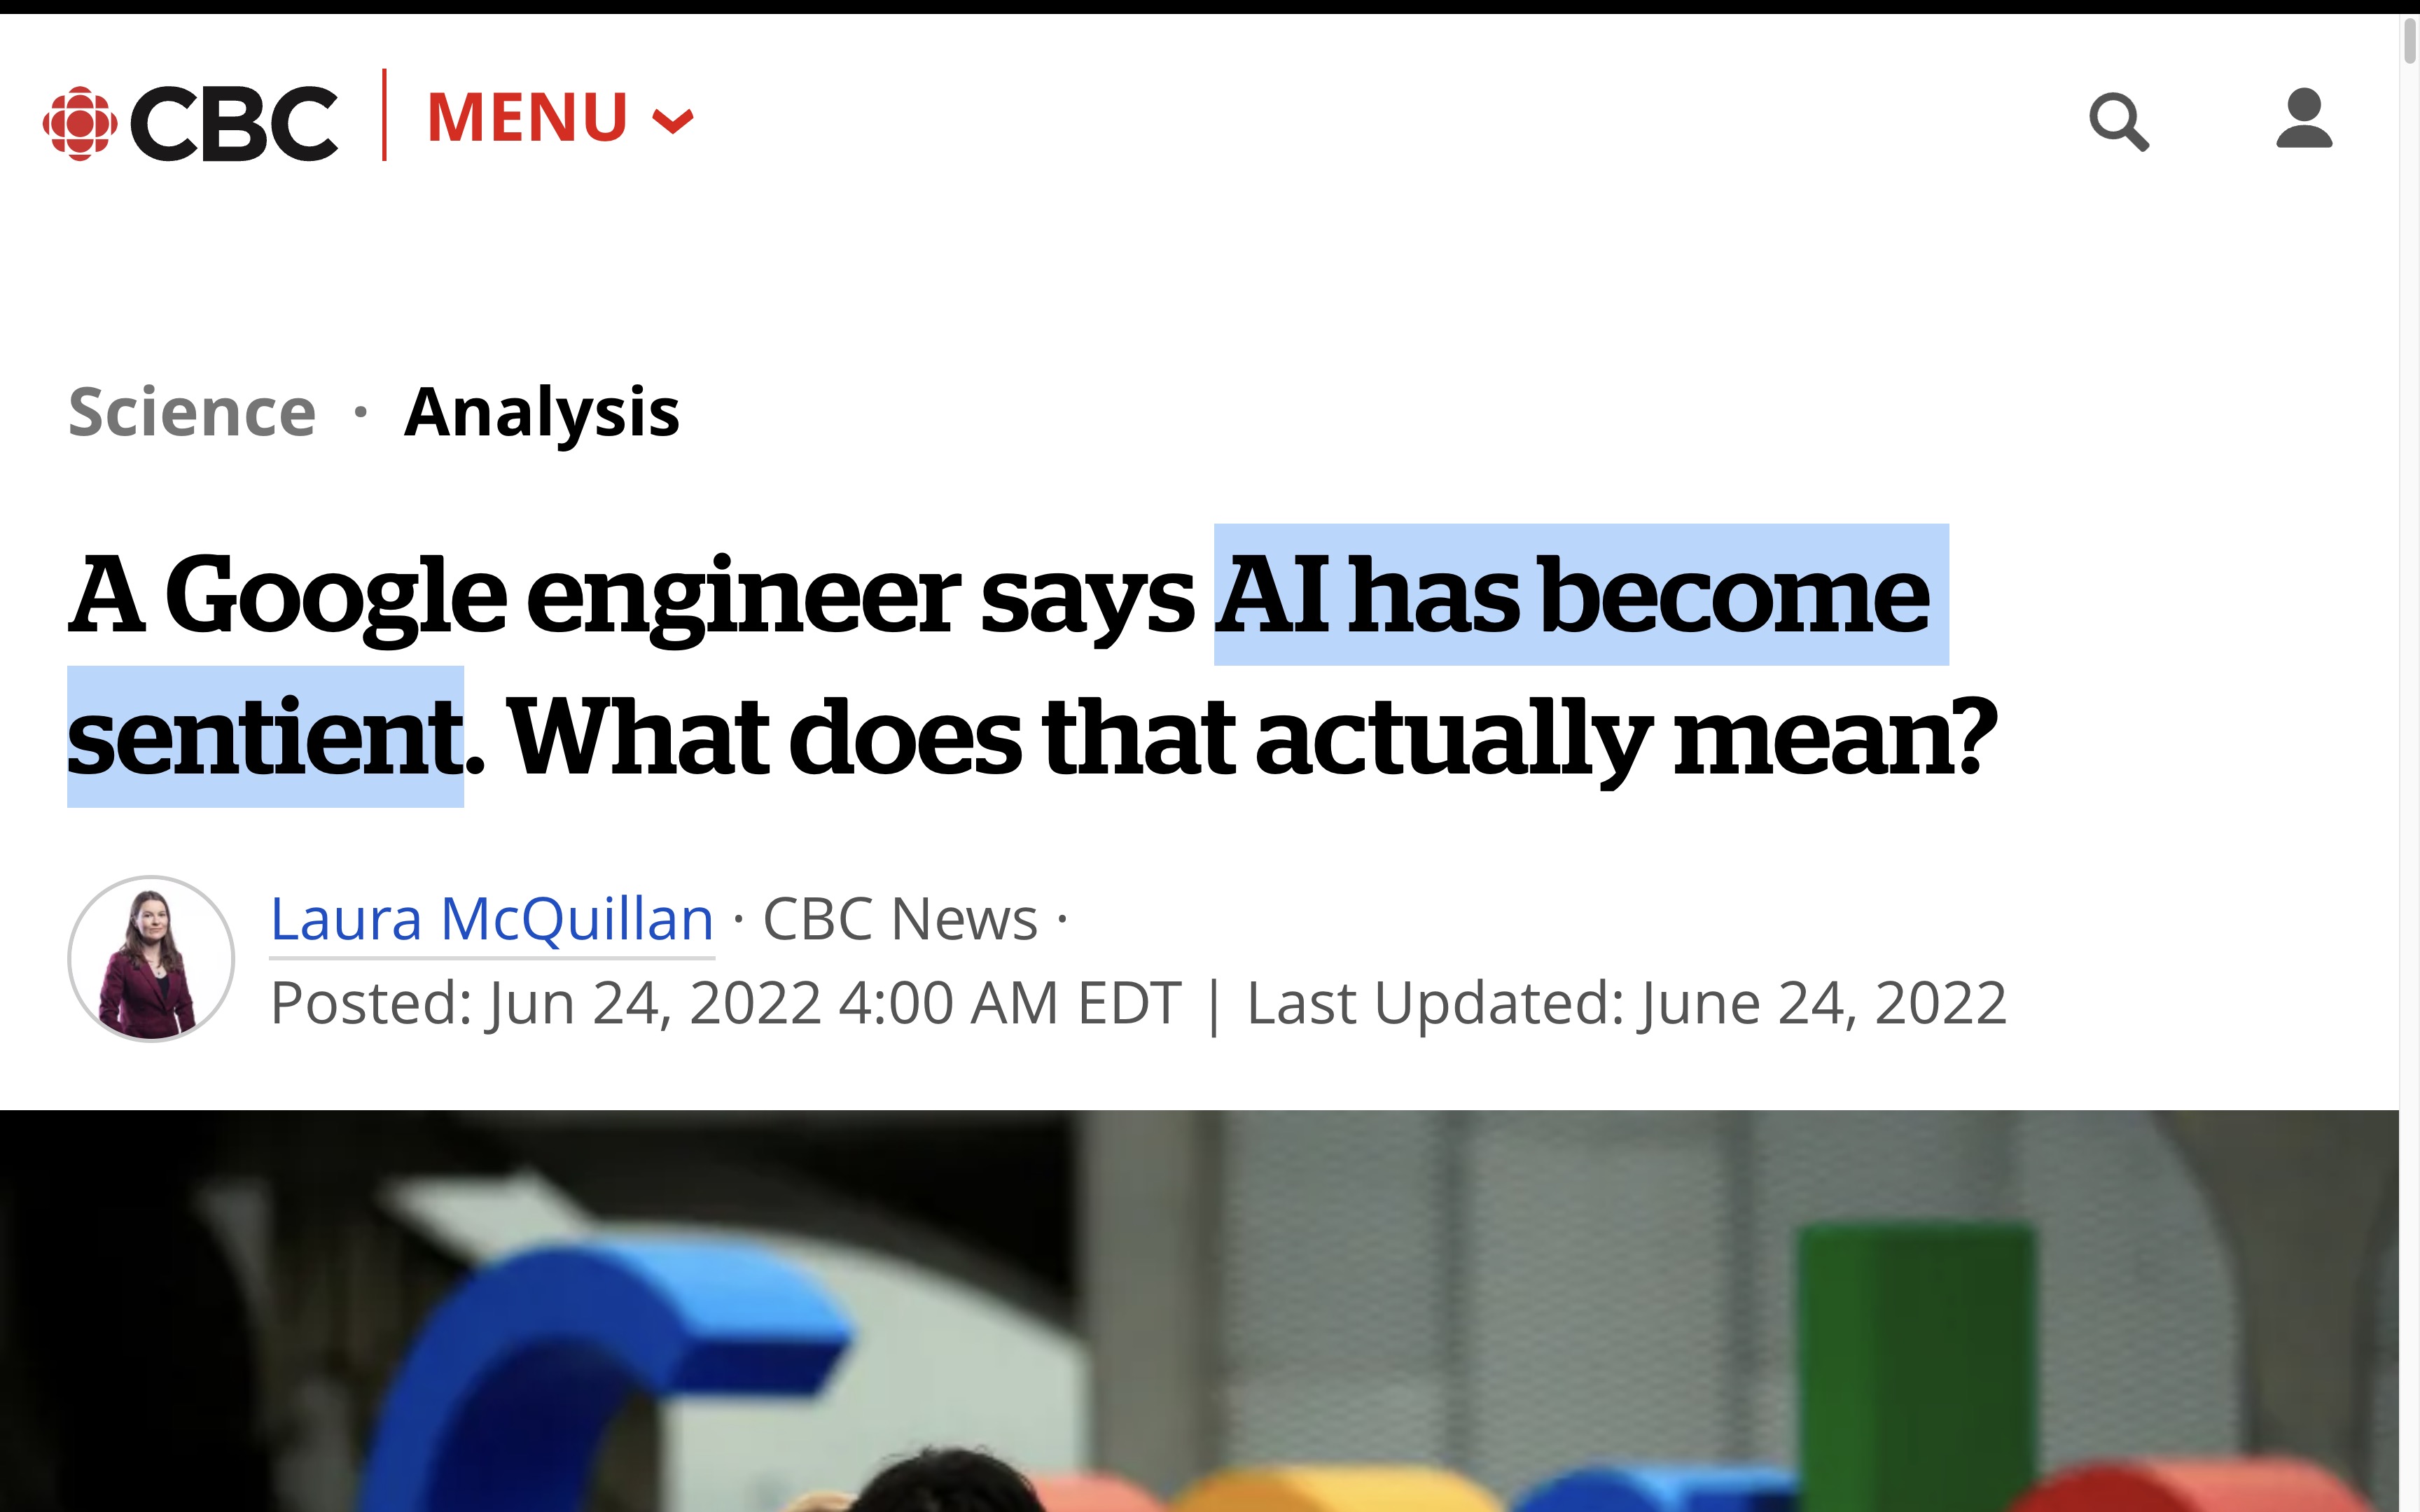 CBC News headline:
A Google engineer says AI has become sentient.
What does that actually mean?
by Laura McQuillan
